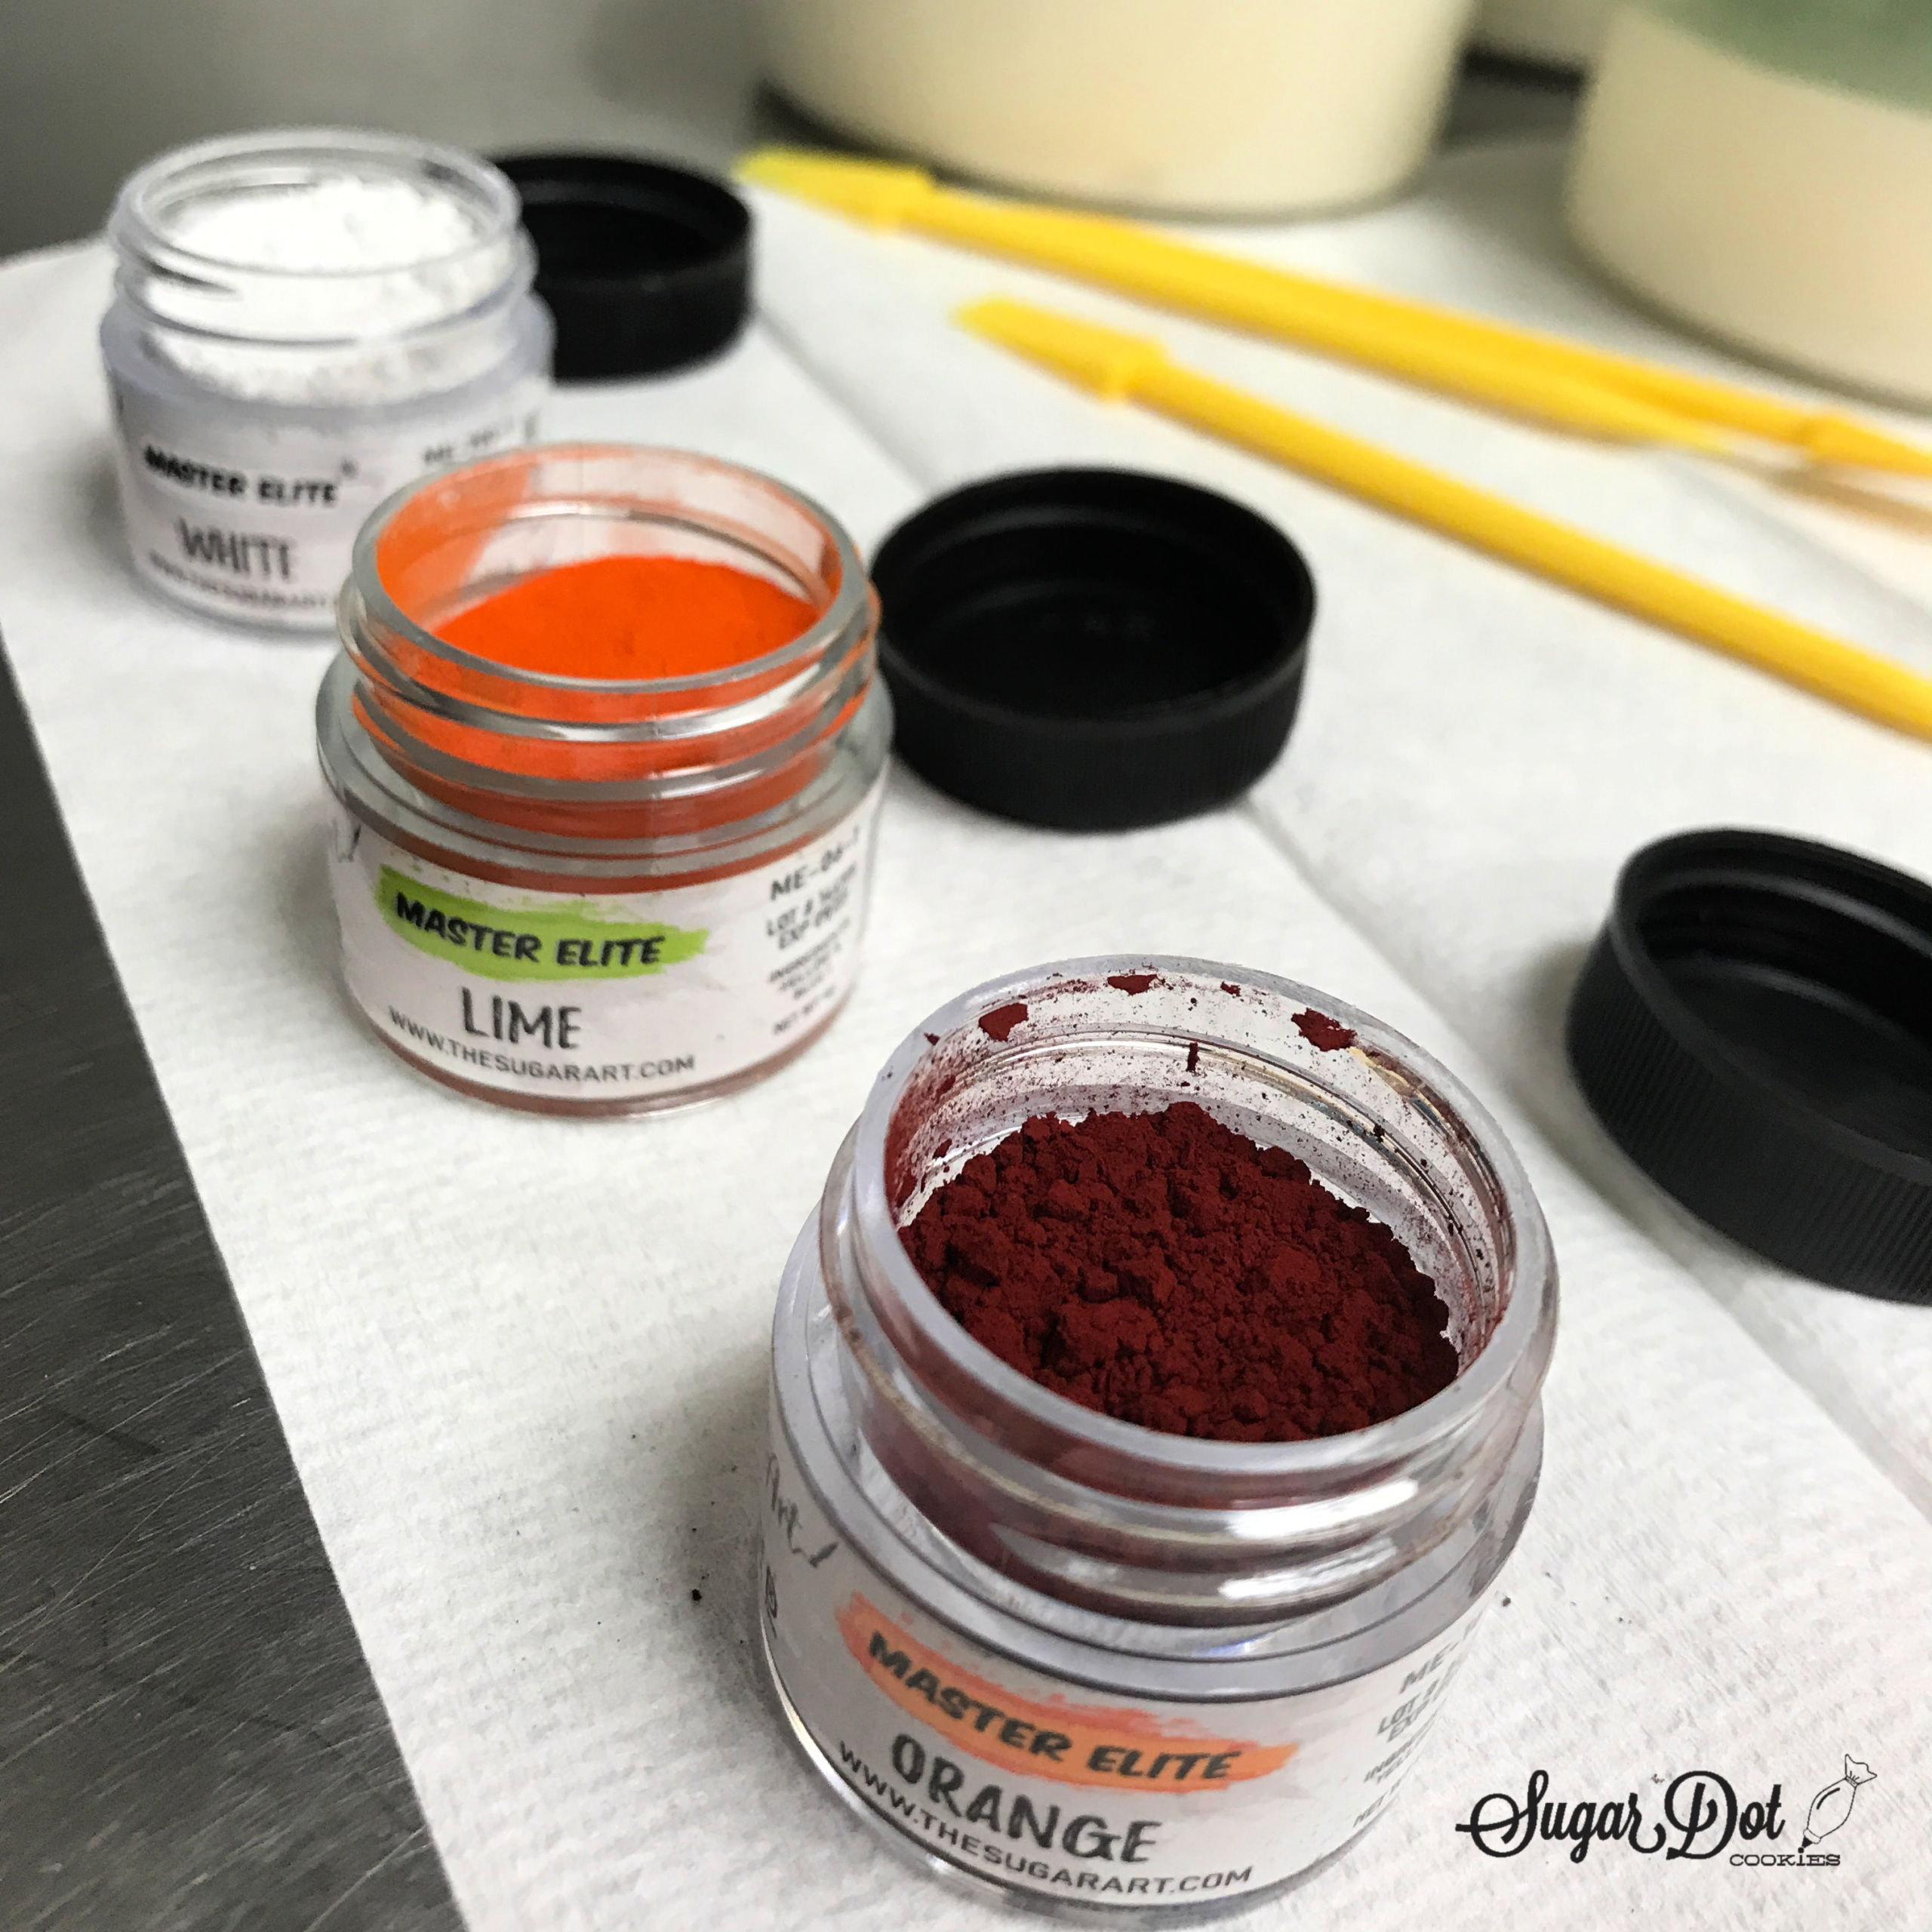 The Sugar Art&#039;s Master Elite powdered food color. Highly pigmented for